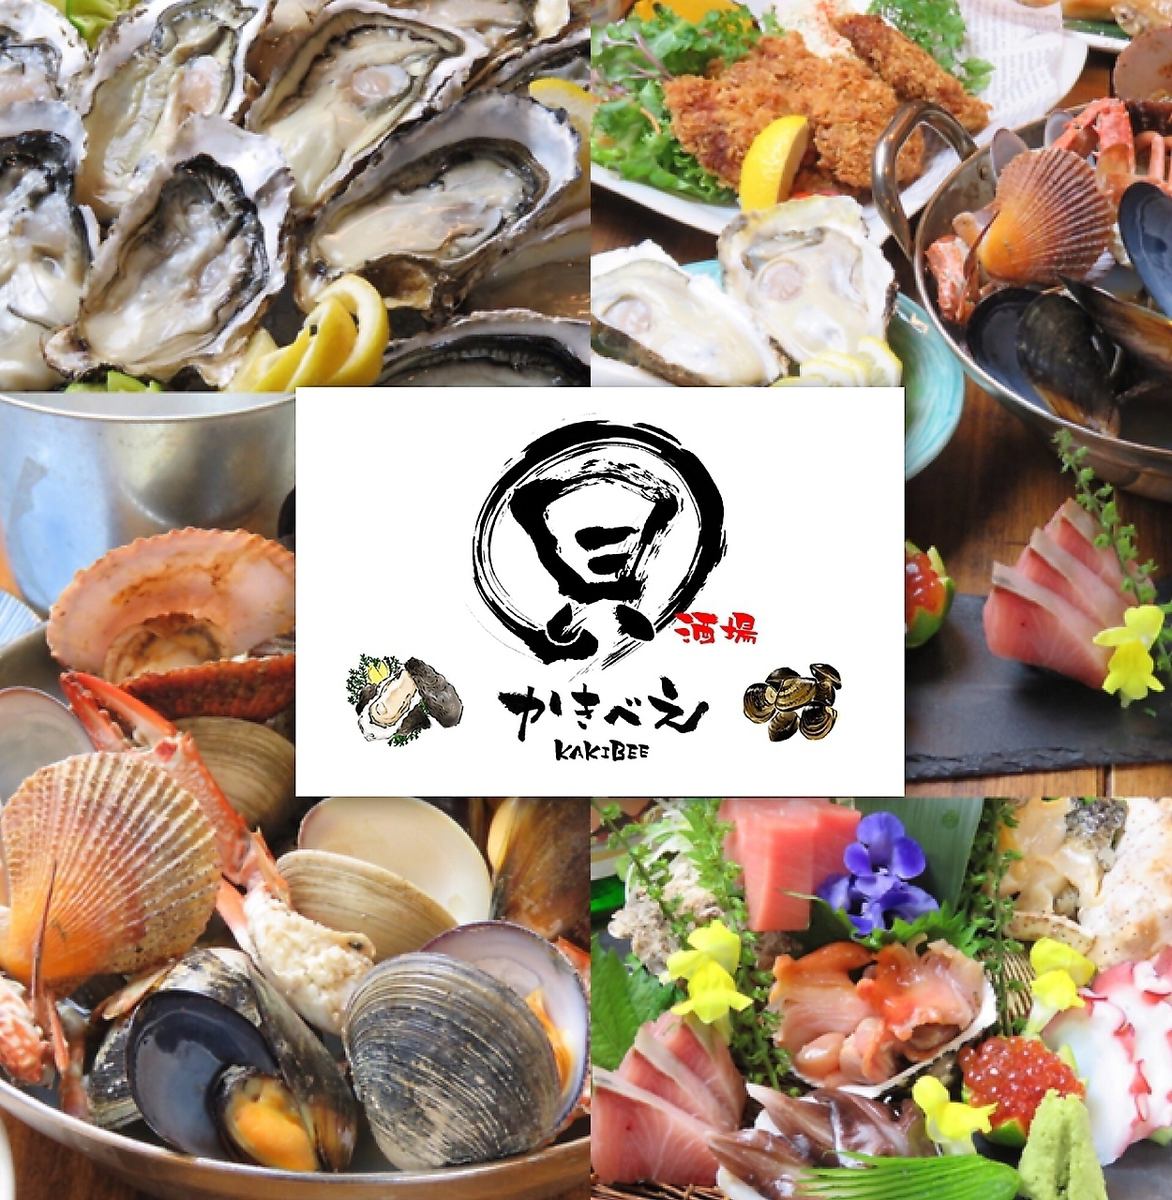 The second popular store in Akabane is finally open! If you want to eat oysters in Kawaguchi, don't hesitate here!